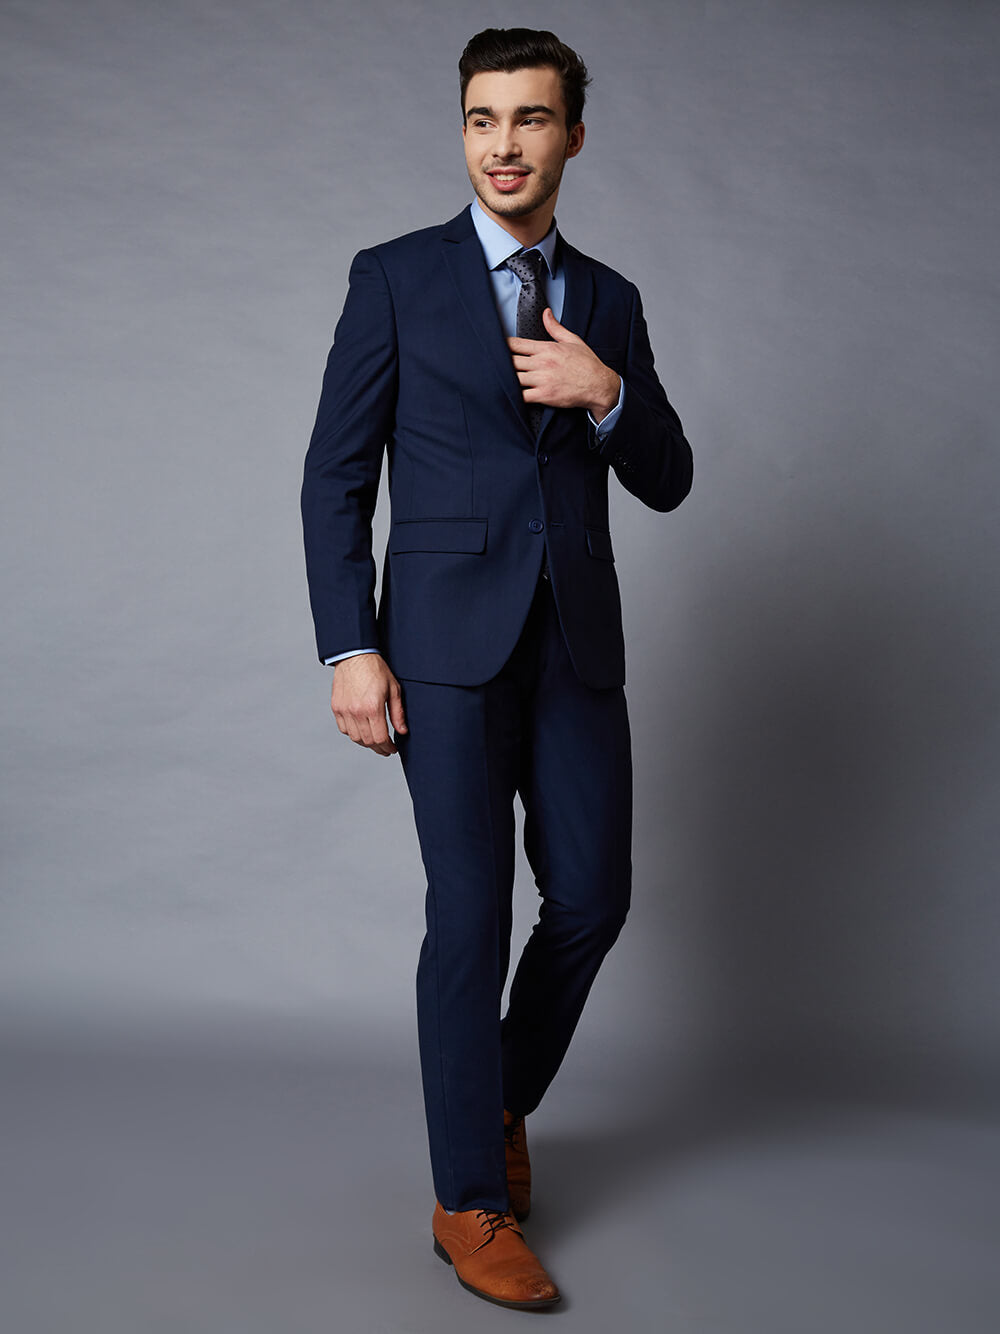 How to Wear 2 and 3-Button Suits - Our Guide